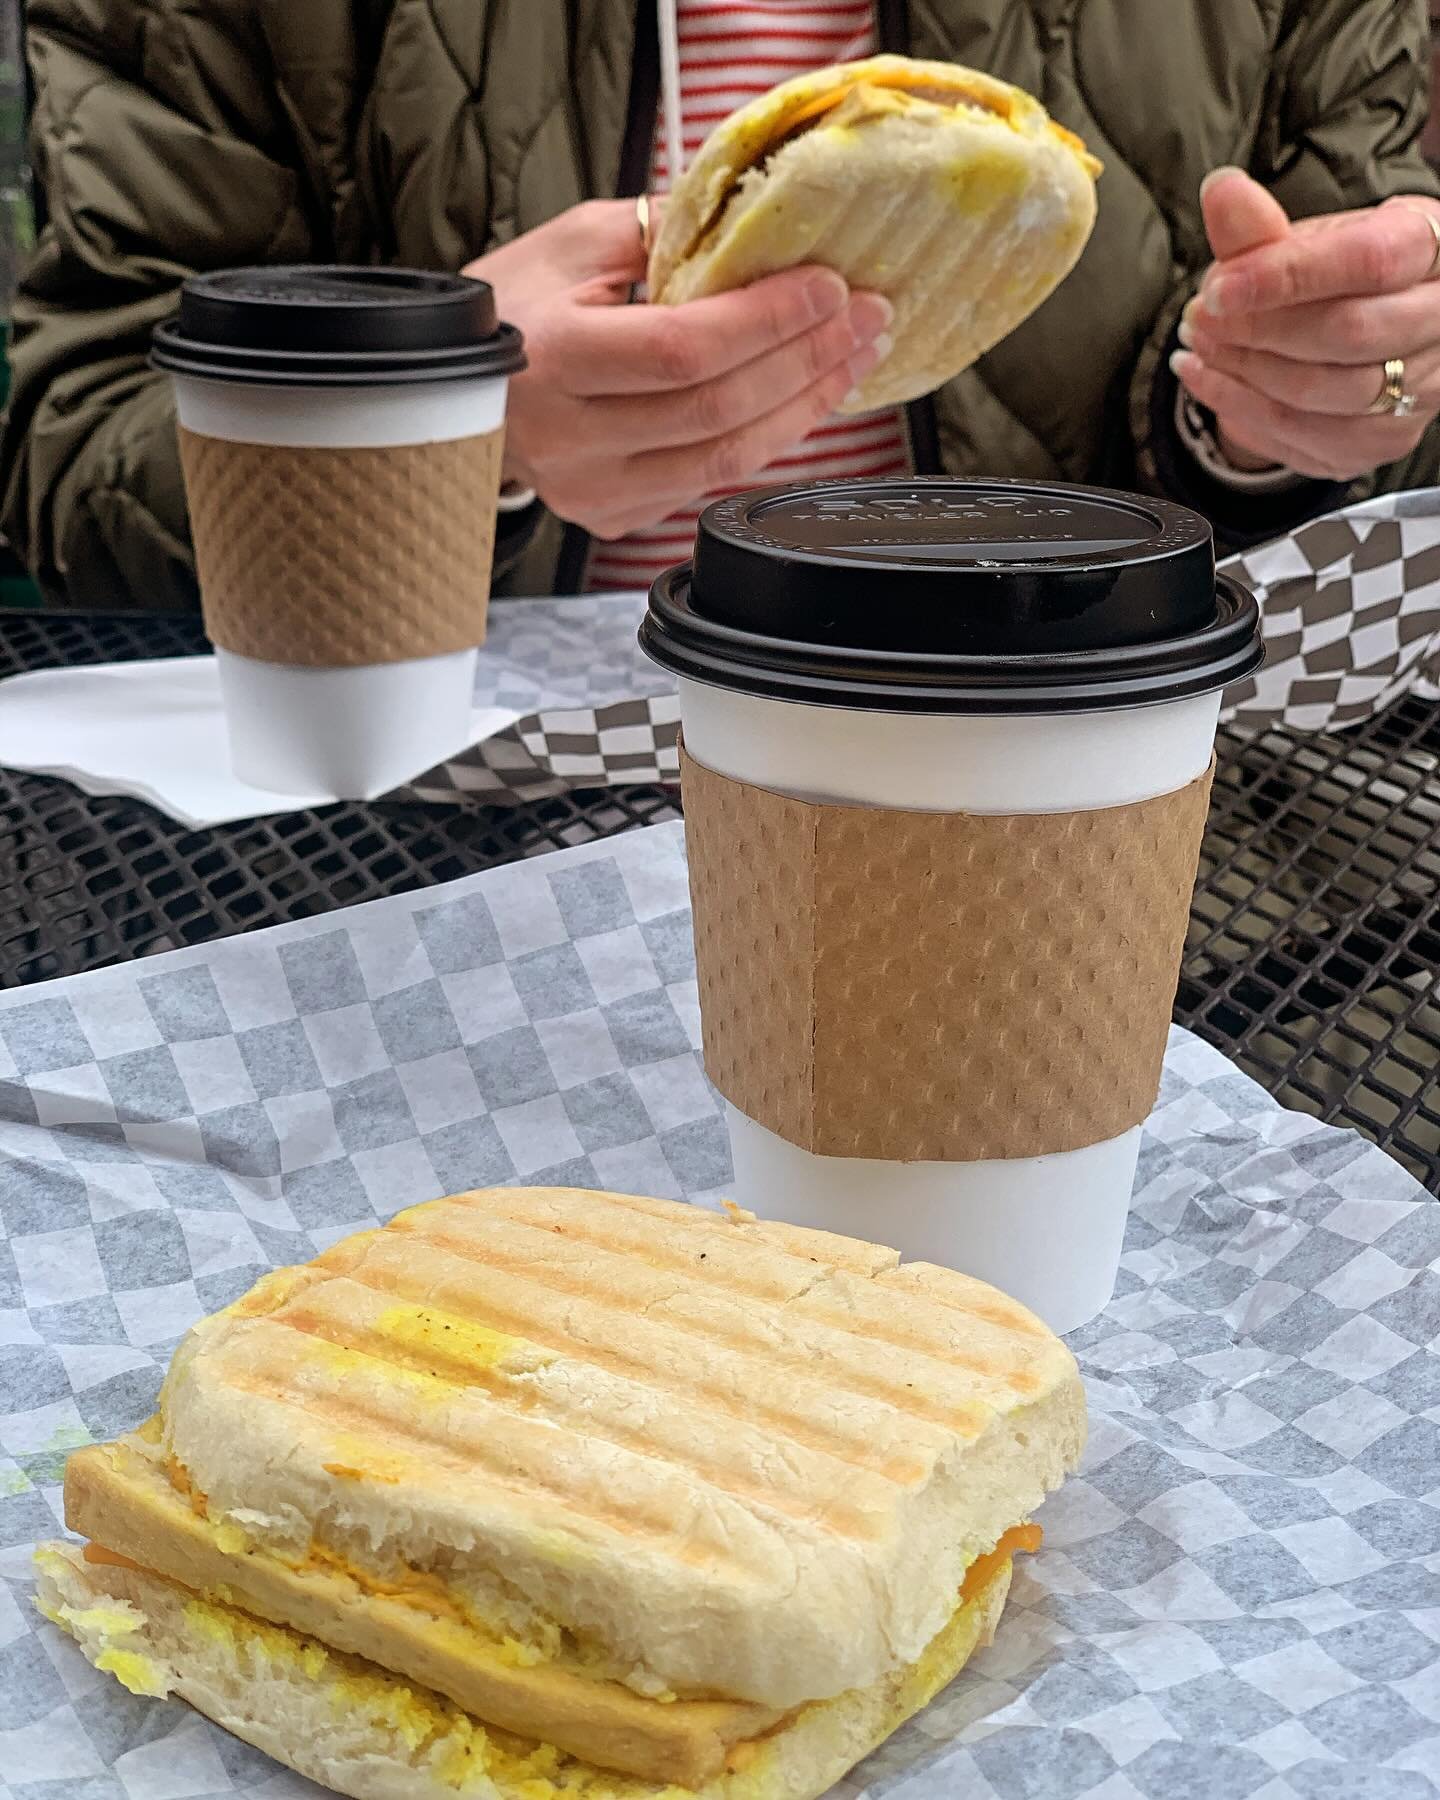 Add @basedfoods_ sandwiches and @hotwirecoffee to your day&mdash;you won&rsquo;t regret it 💛➕☕️ 

#hotwire #seattlecoffee #specialsofthemonth #hotwirecoffee #westseattle #coffeeholic #caffeine #igcoffee #icedcoffee #coffeedaily #coffee #coffeetime #